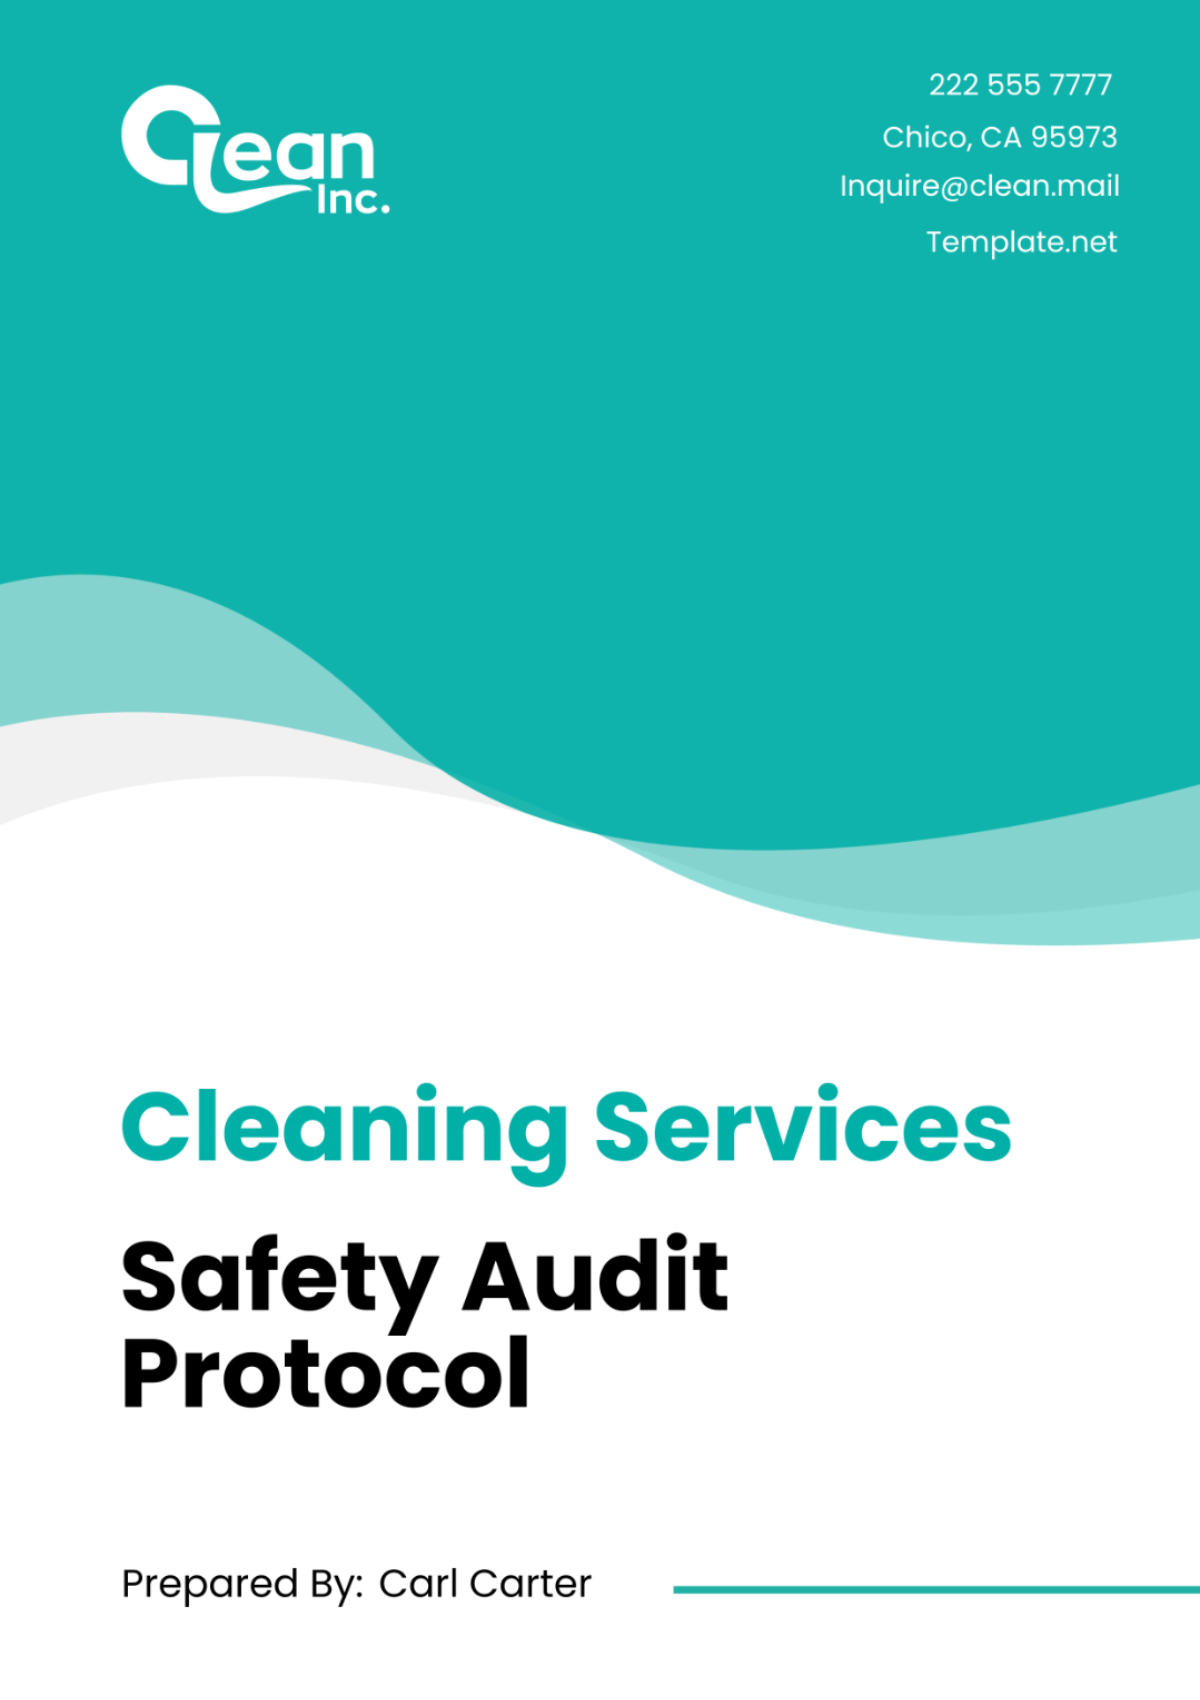 Free Cleaning Services Safety Audit Protocol Template